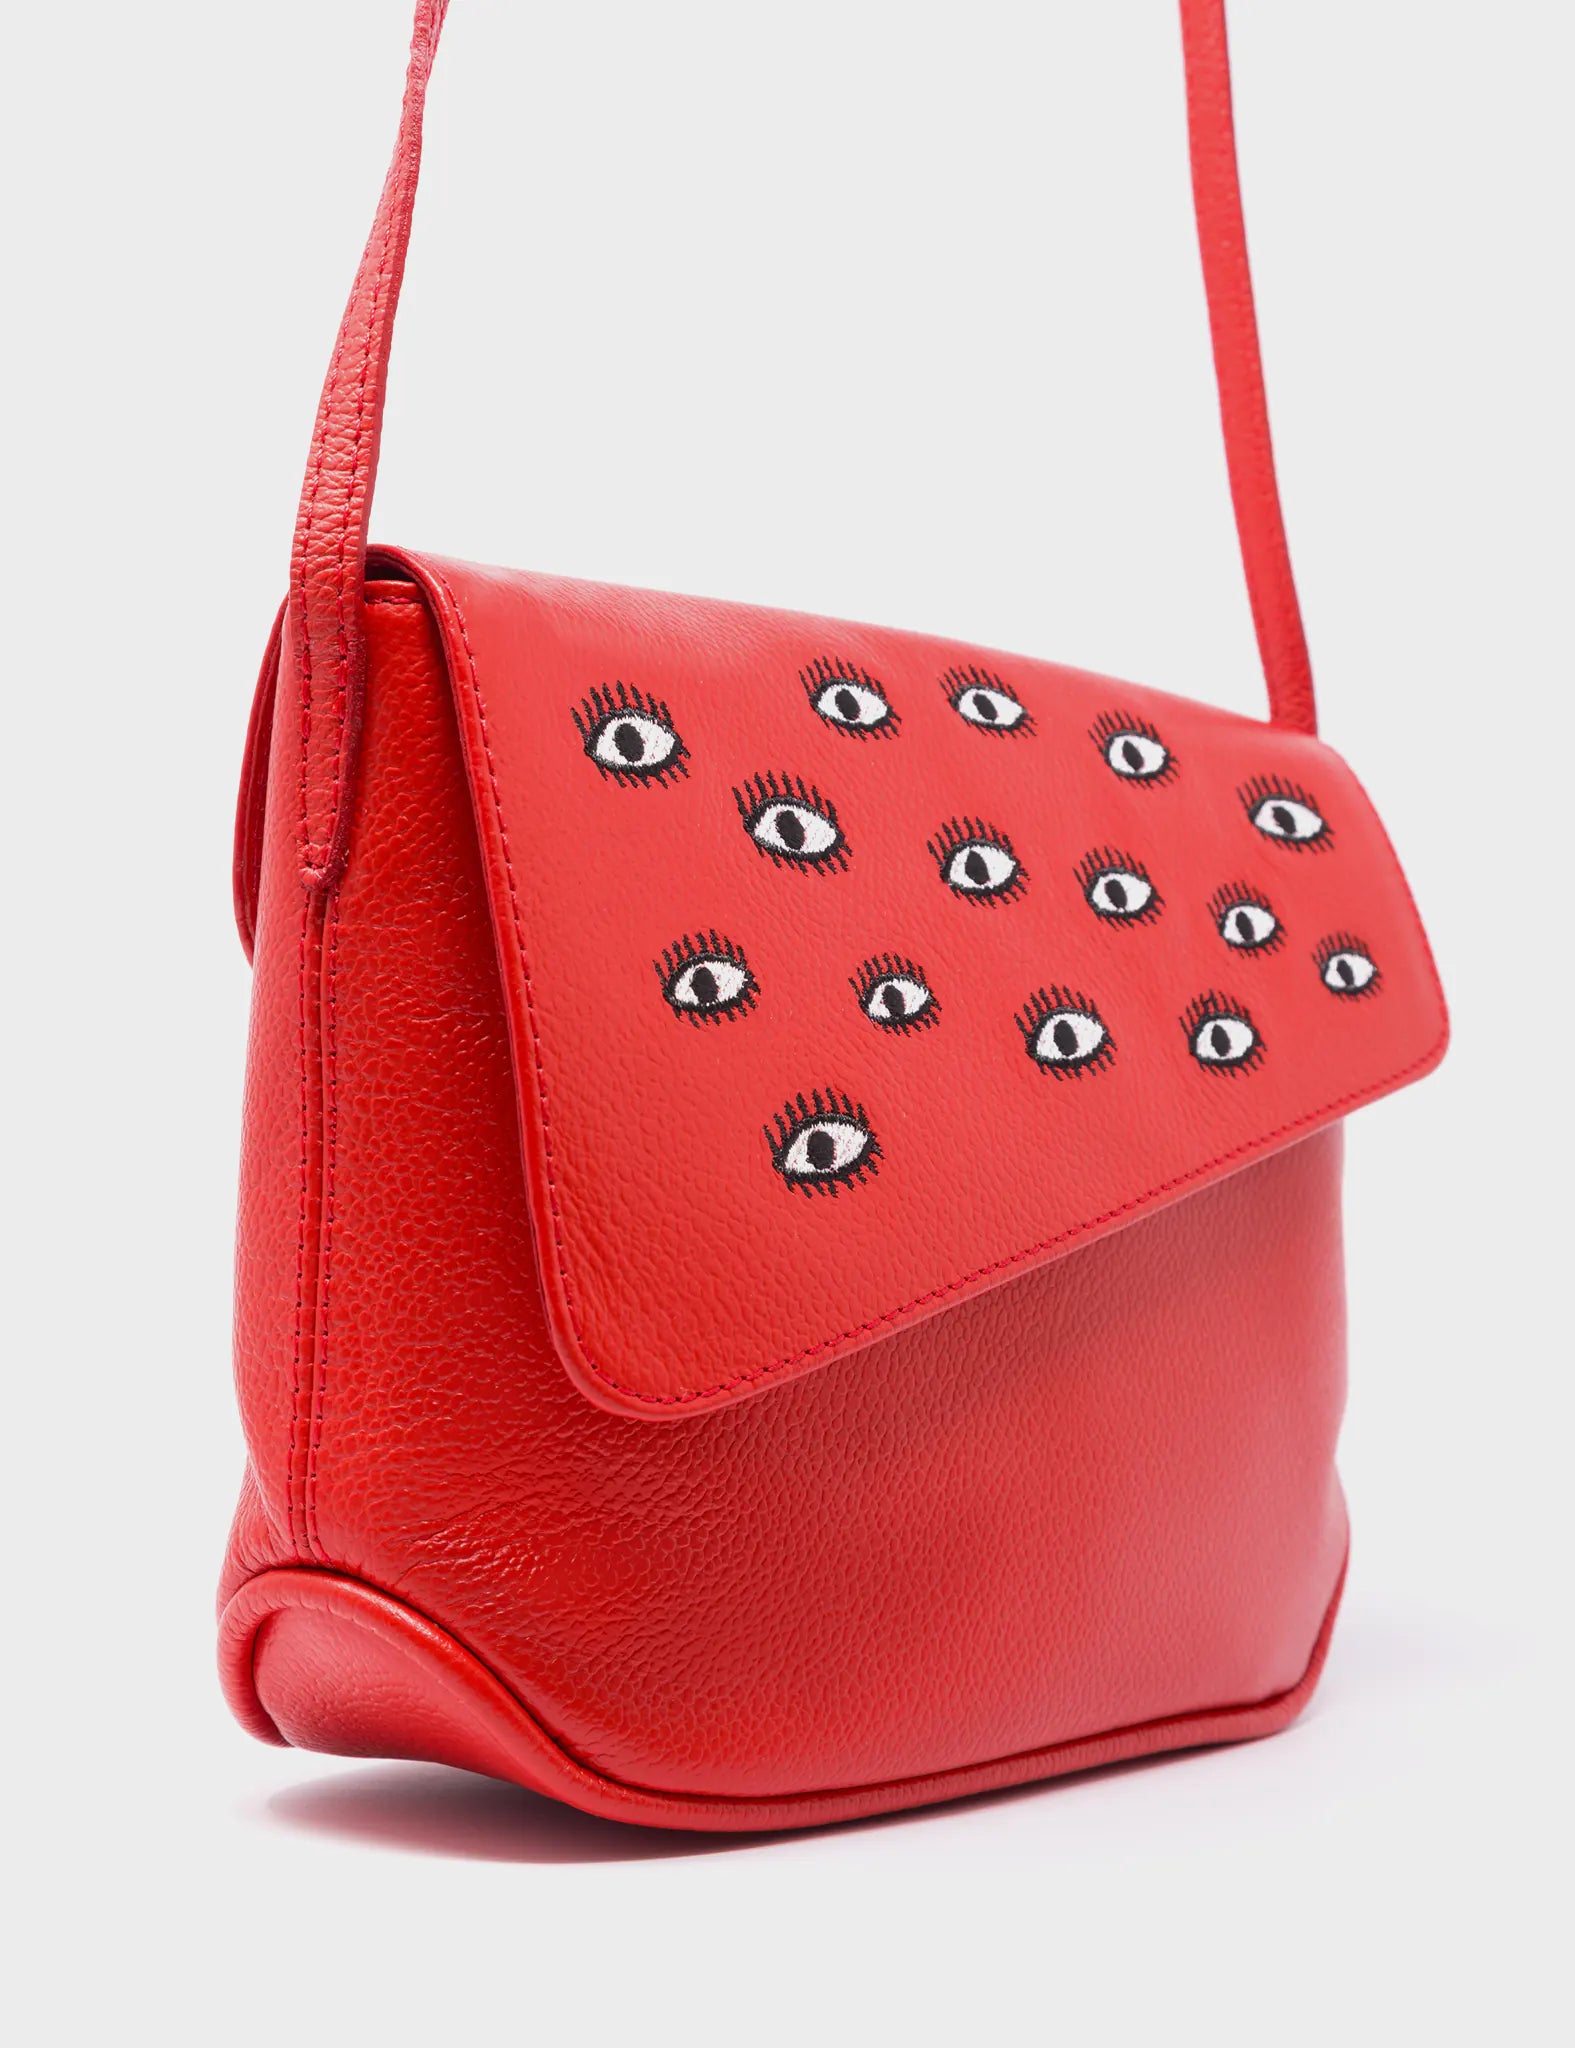 Bruno Mini Crossbody Red Leather Bag - All Over Eyes Embroidery - Side Corner View